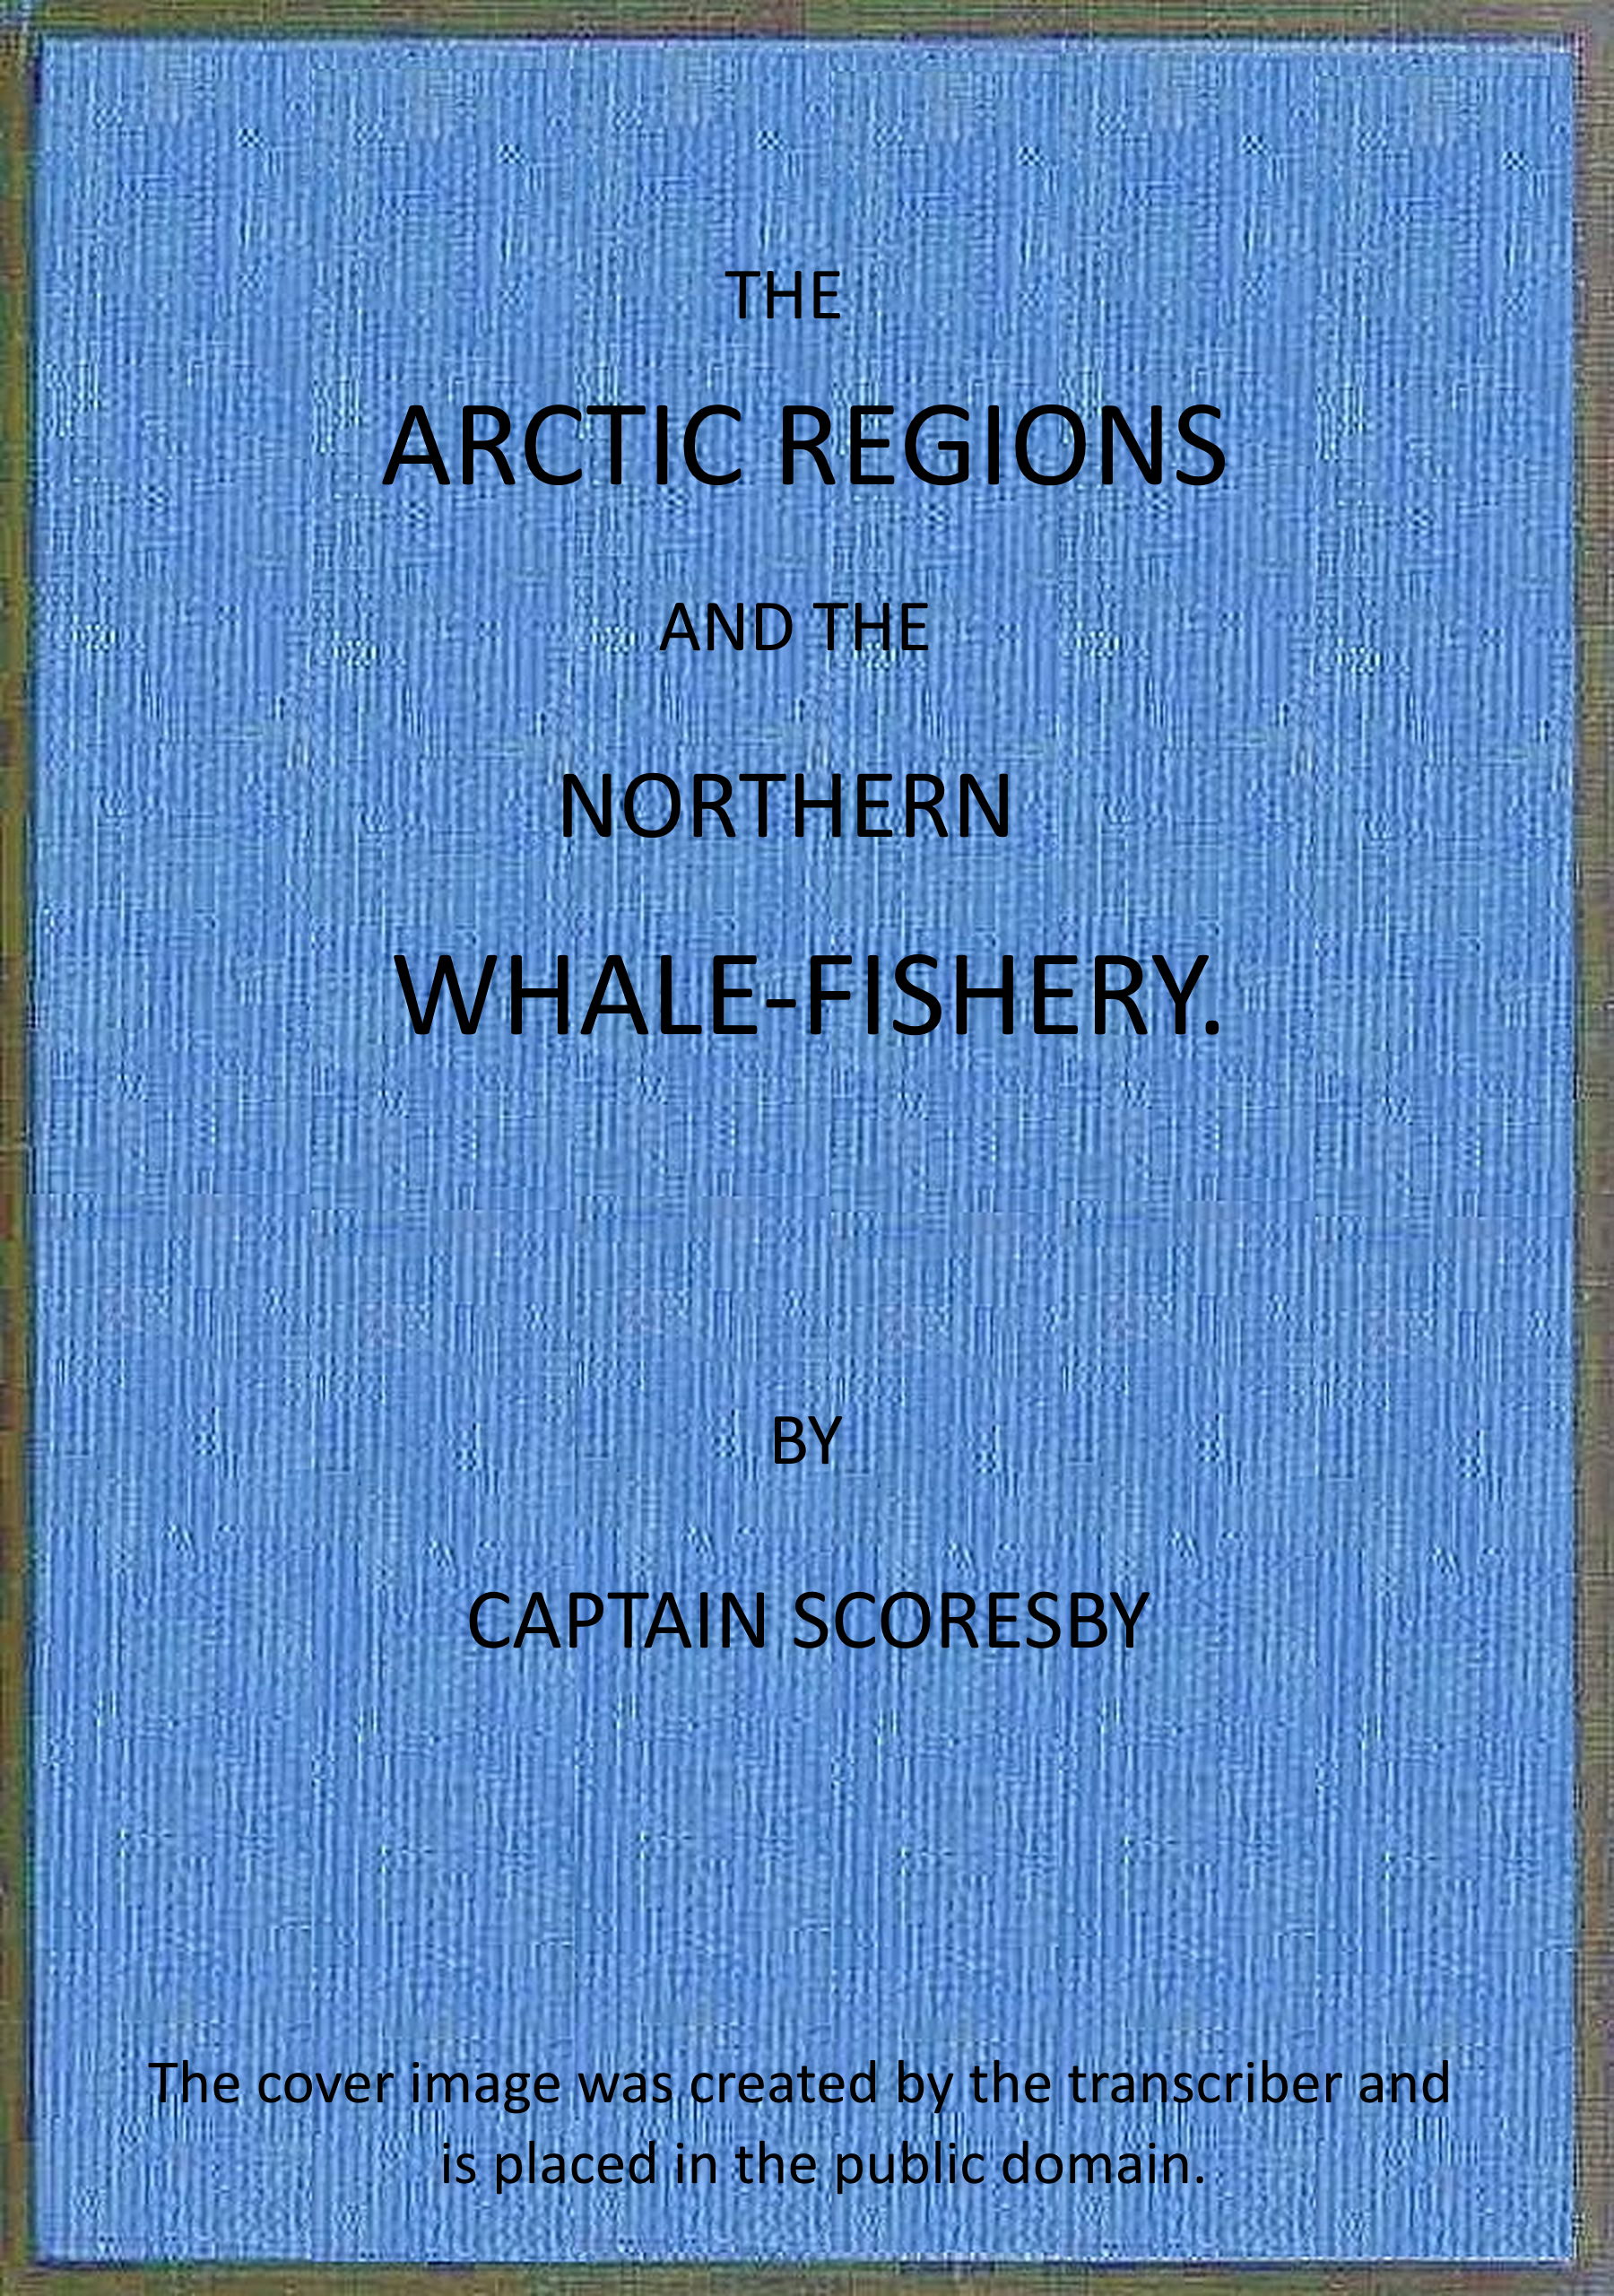 The Arctic regions and the northern whale-fishery